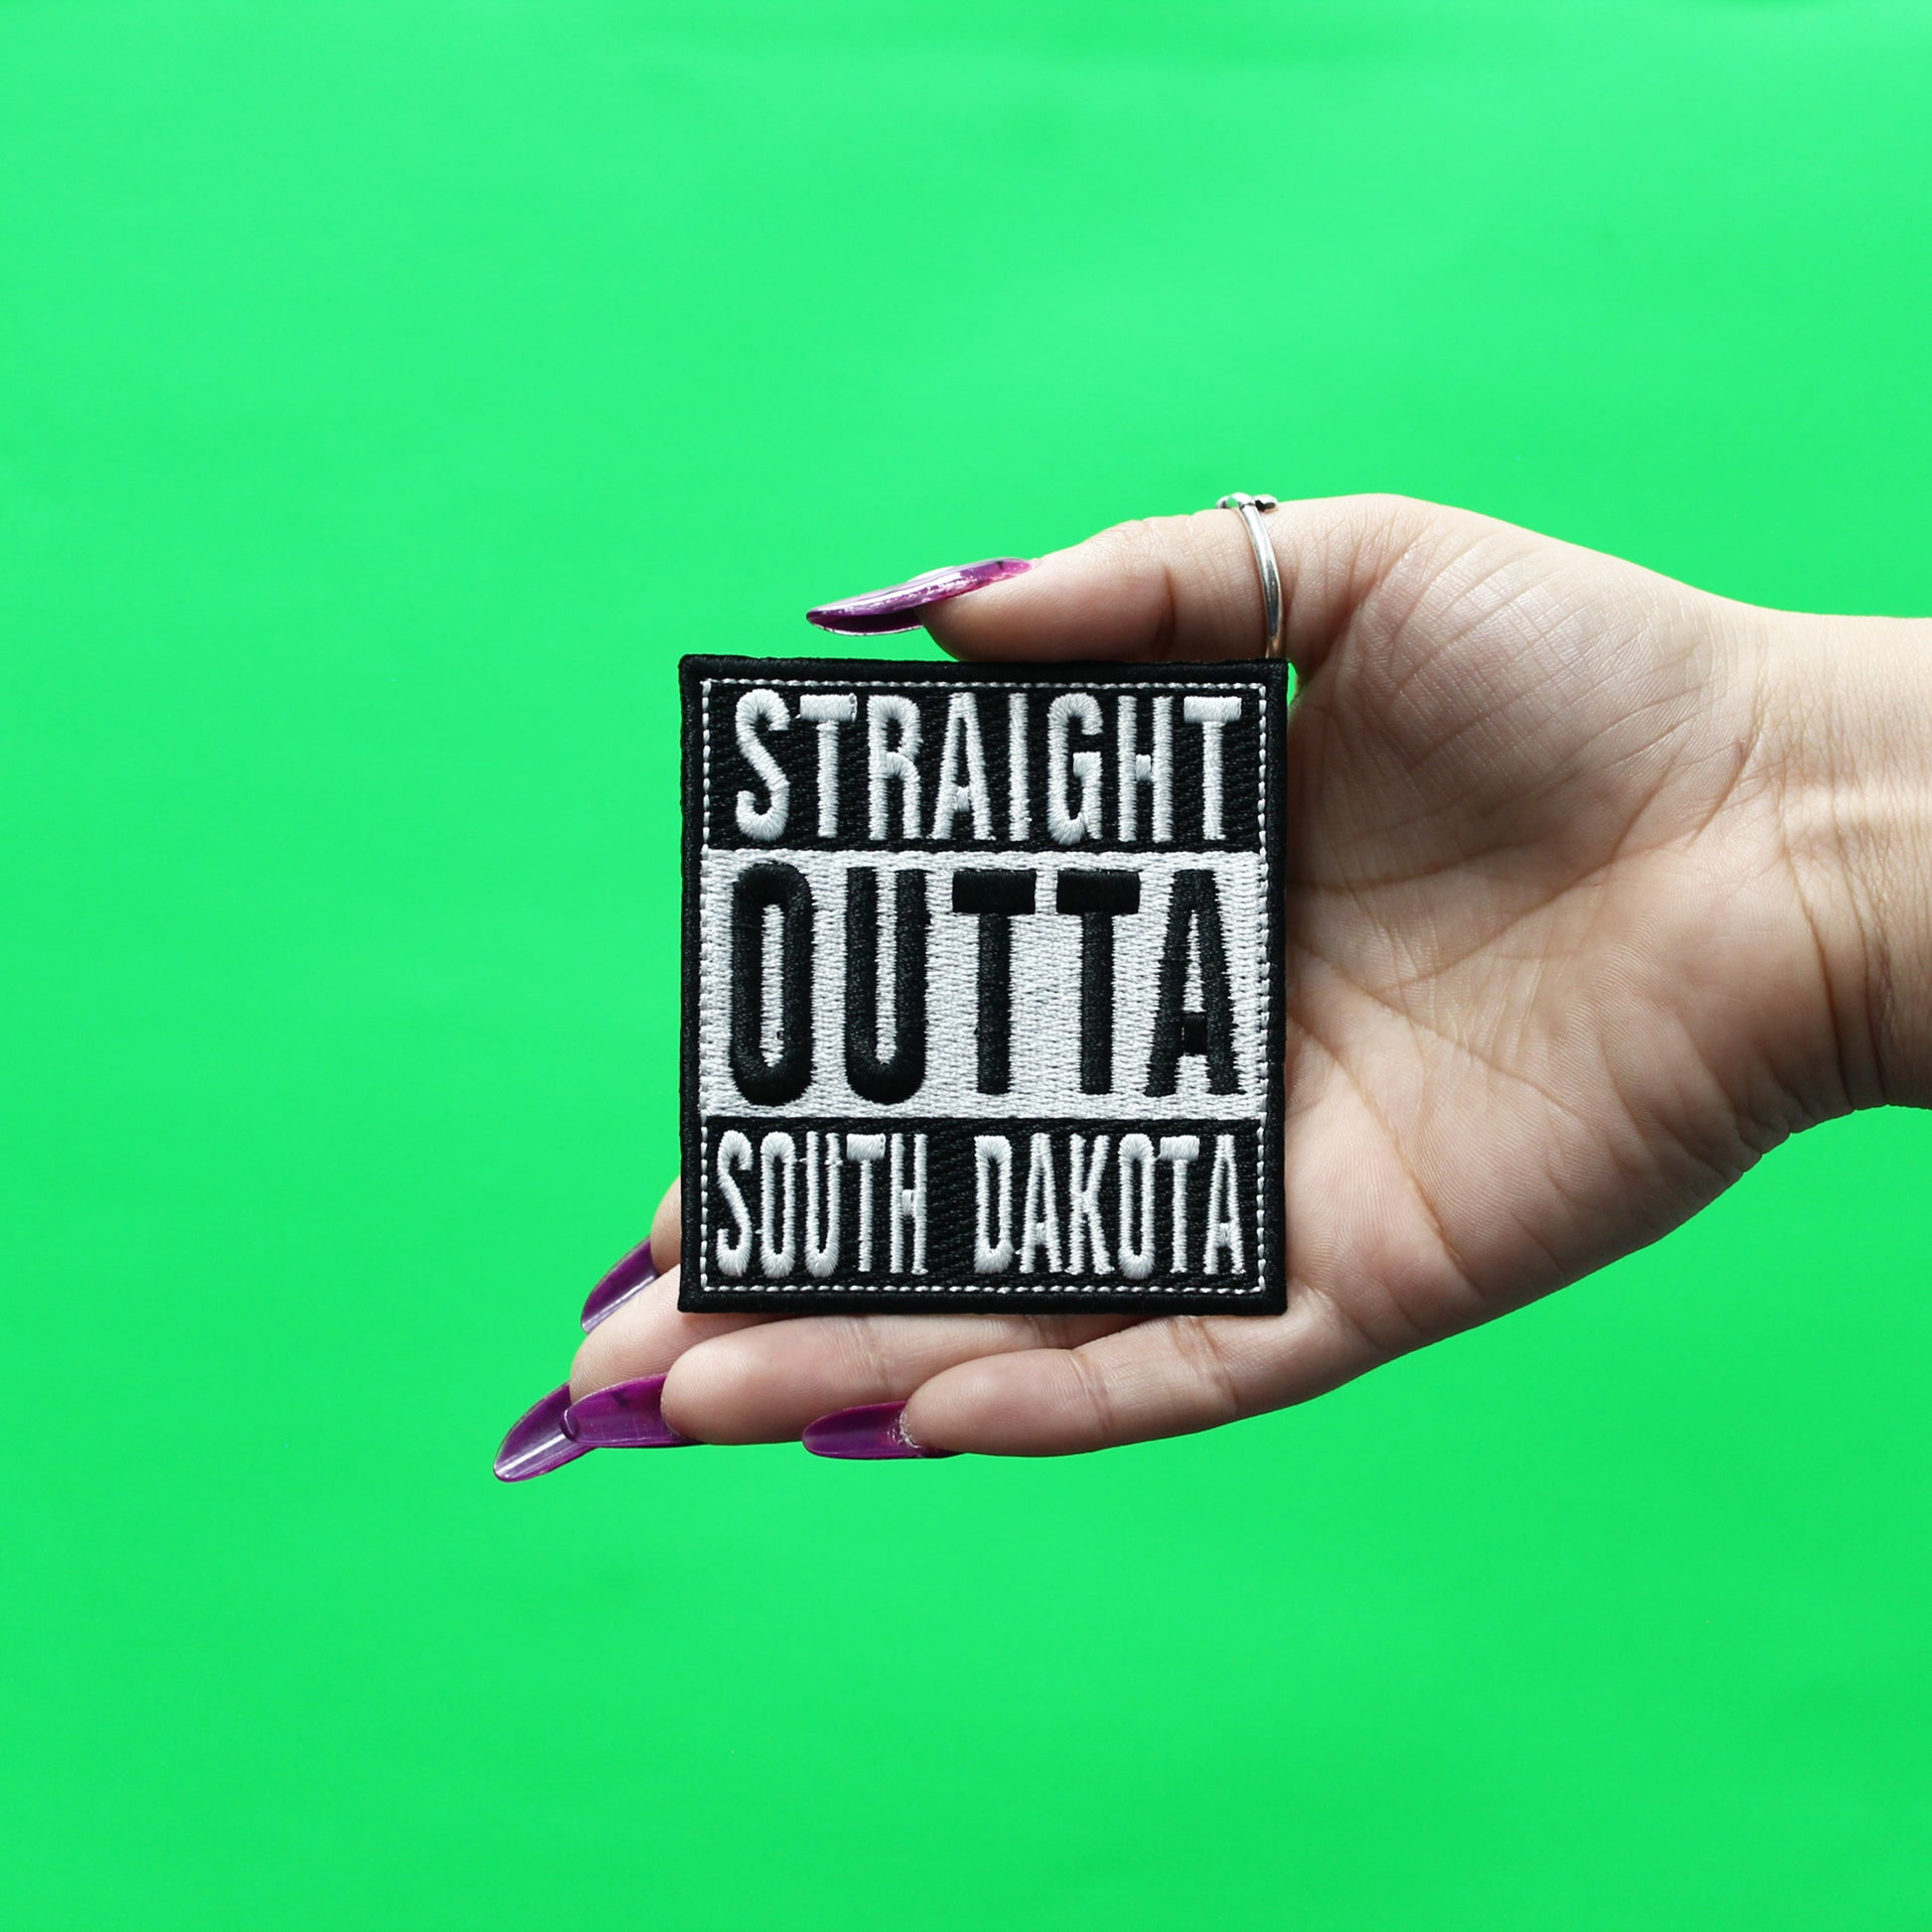 Straight Outta South Dakota Patch Embroidered Iron On 